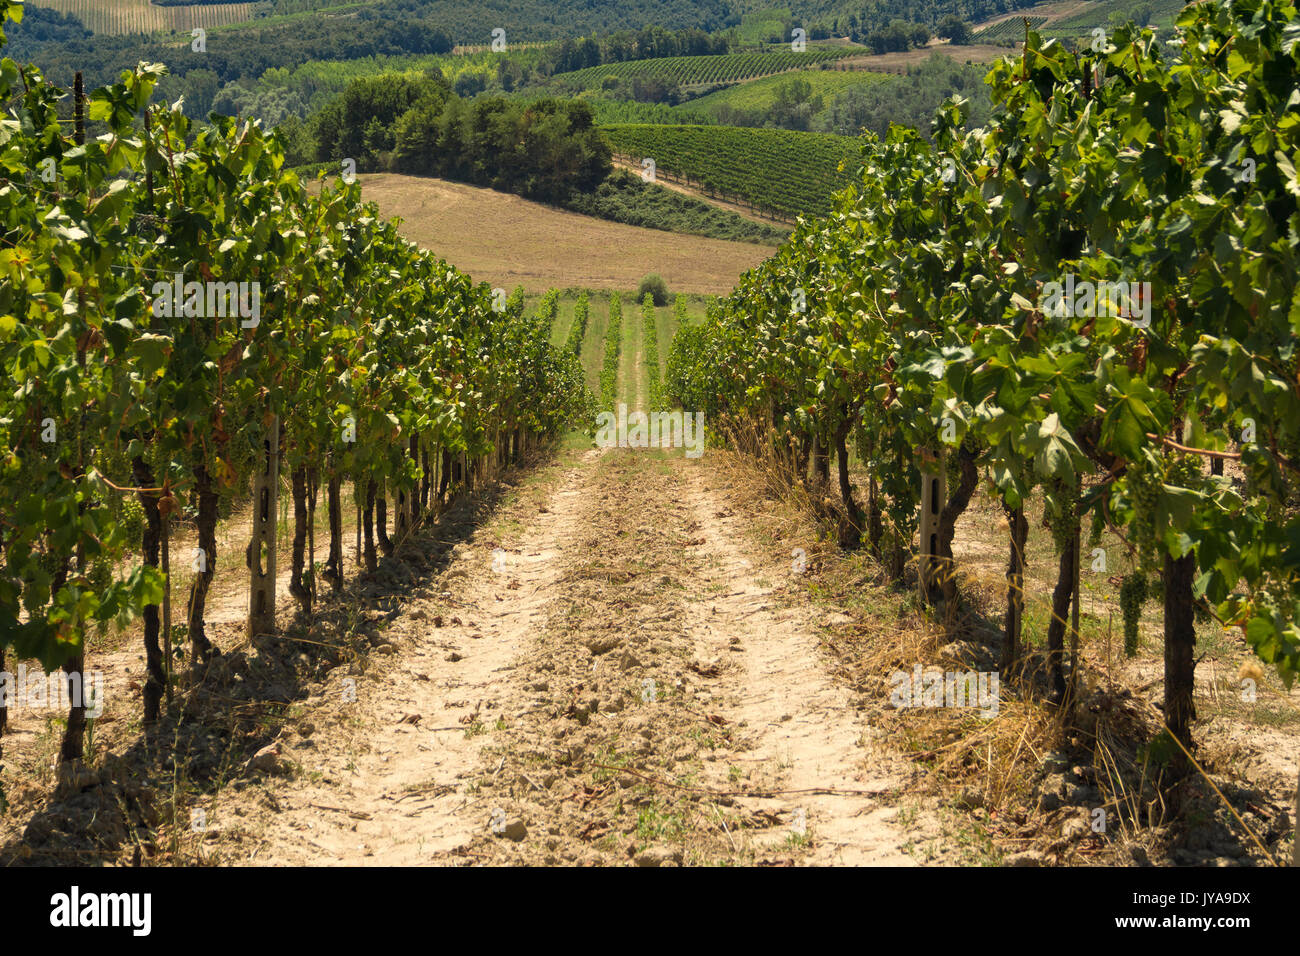 Rows of vines growing in Vineyard in Tuscany Stock Photo